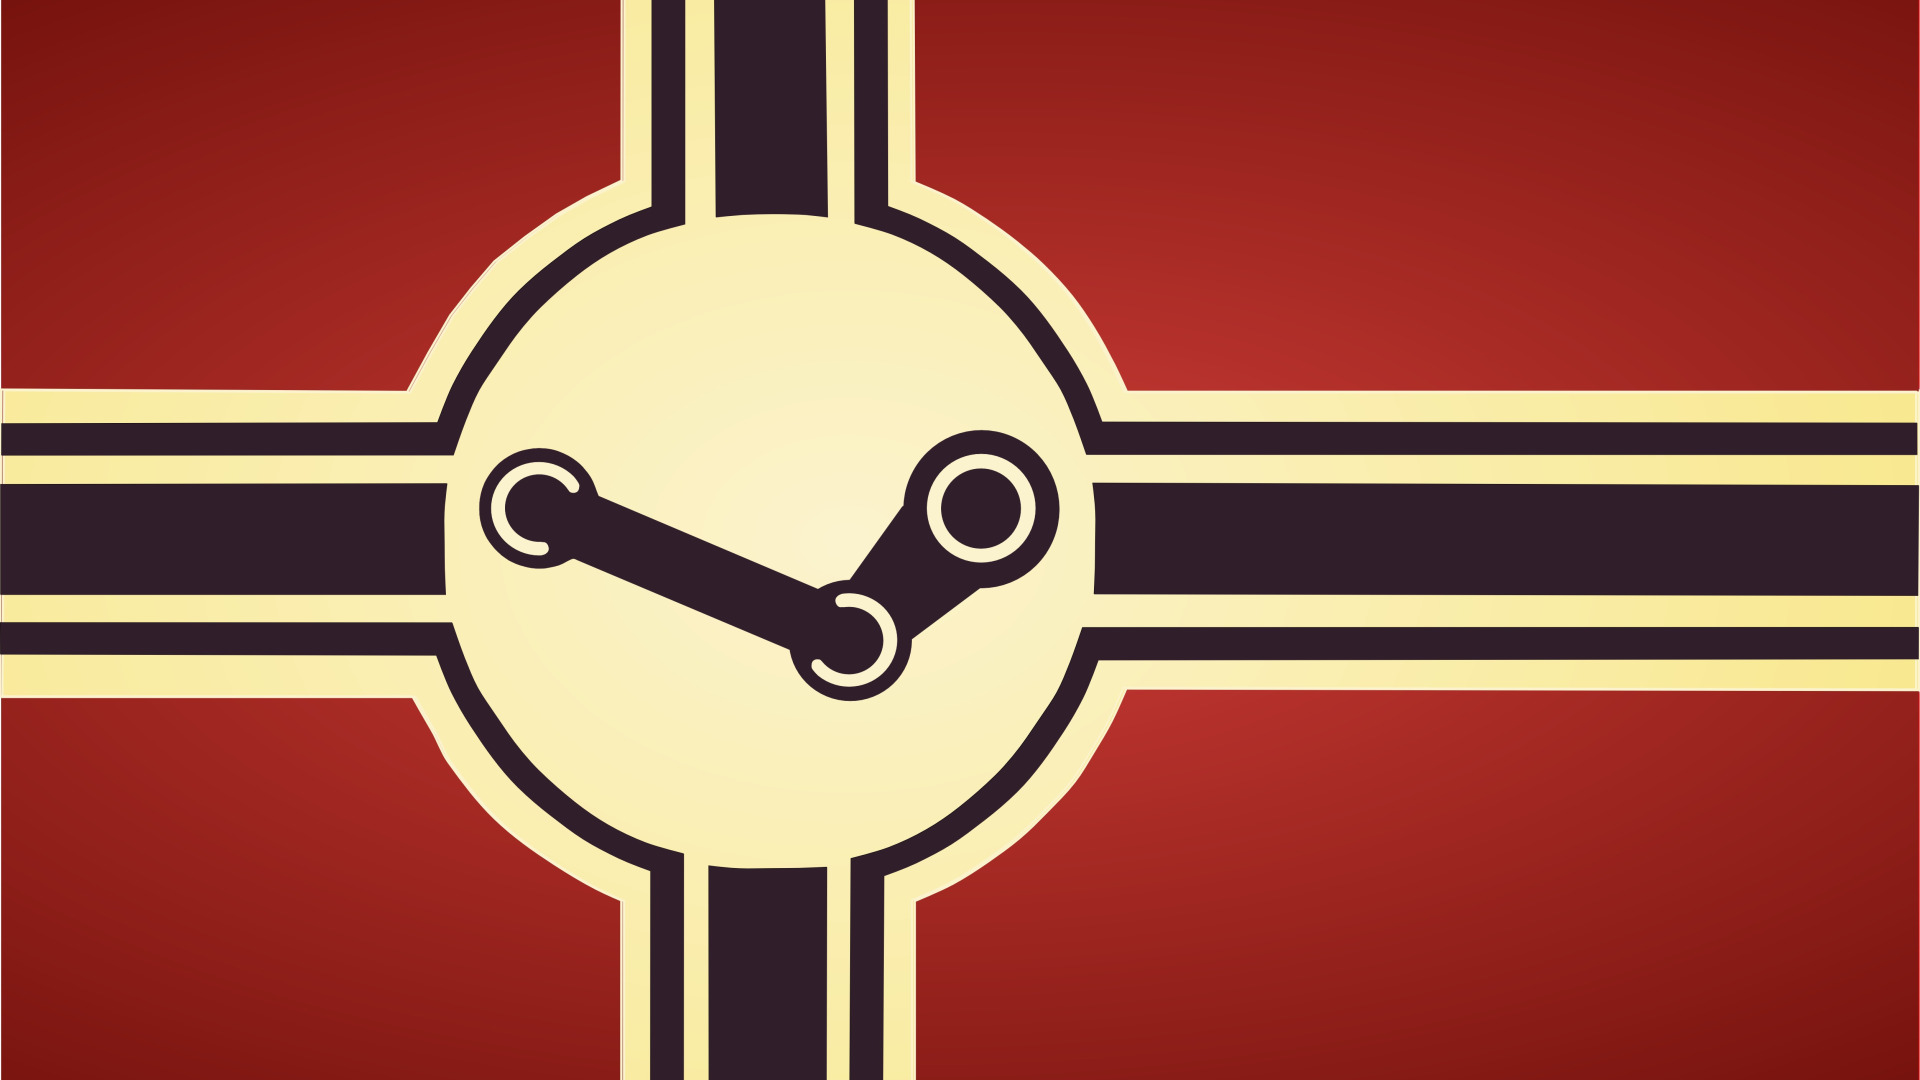 Download wallpaper windows, steam, flag, steam, nazi, red fone, section  games in resolution 1920x1080